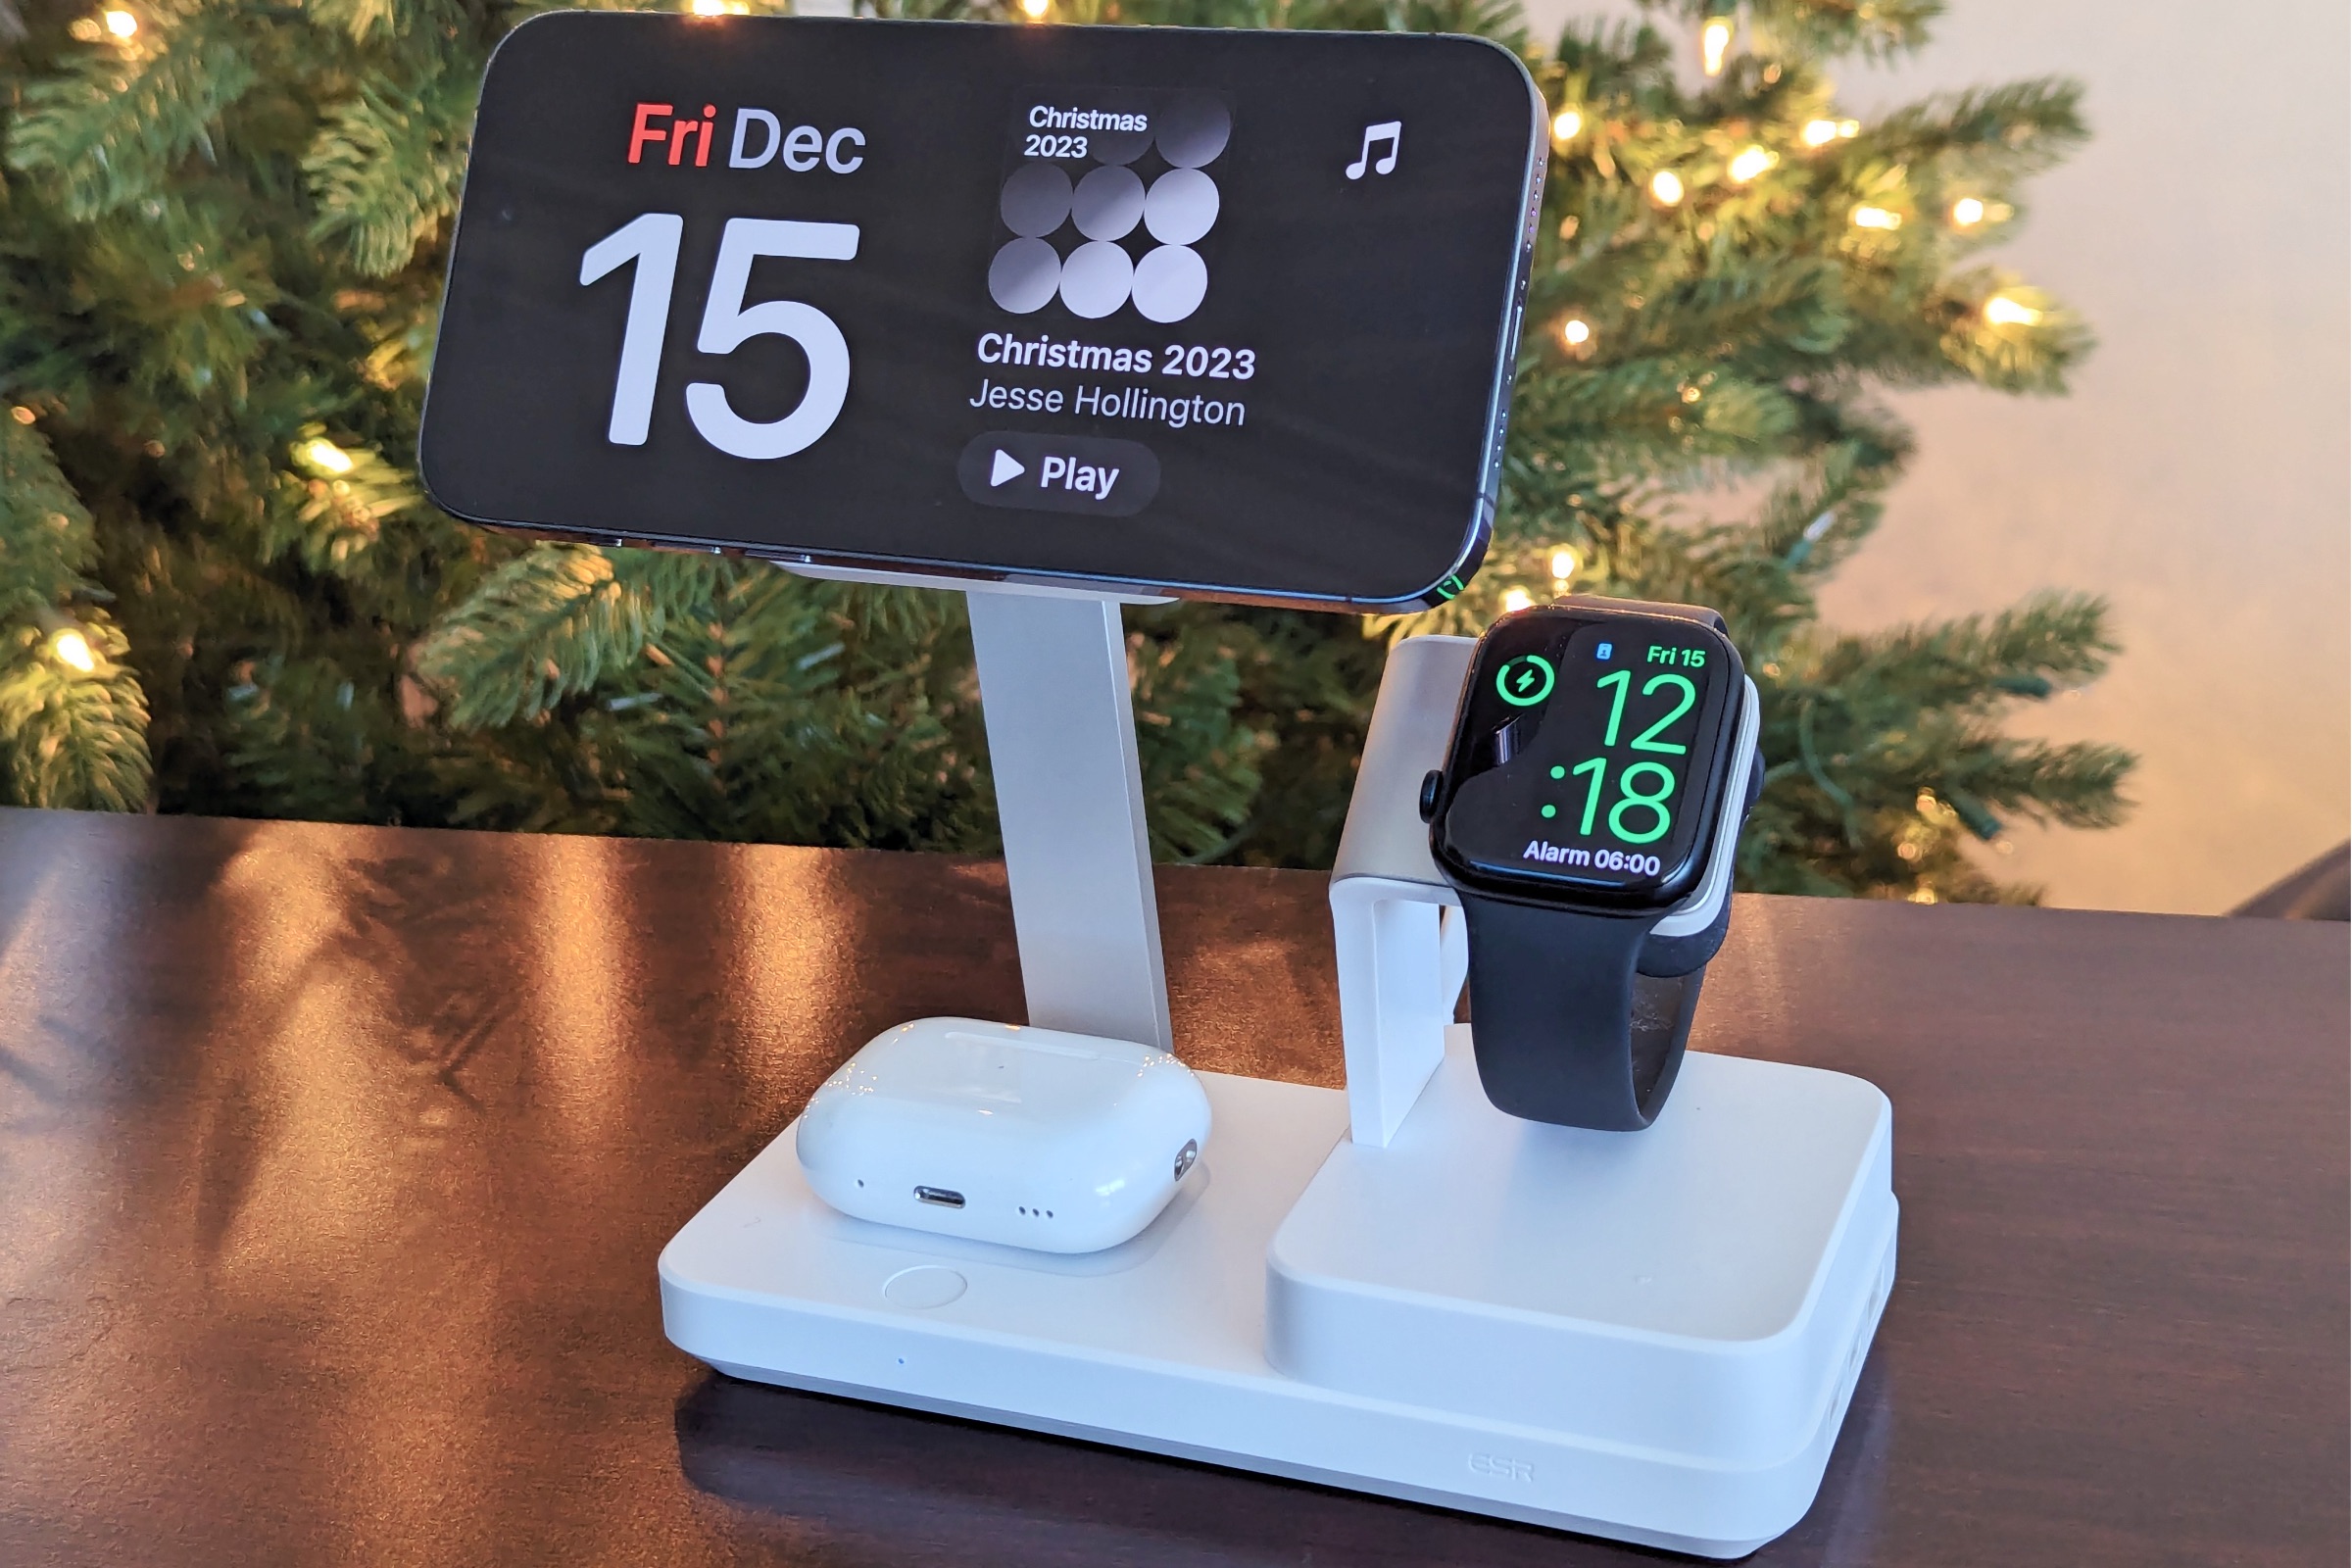 This Apple Health-ready smart scale arrives ahead of Christmas and